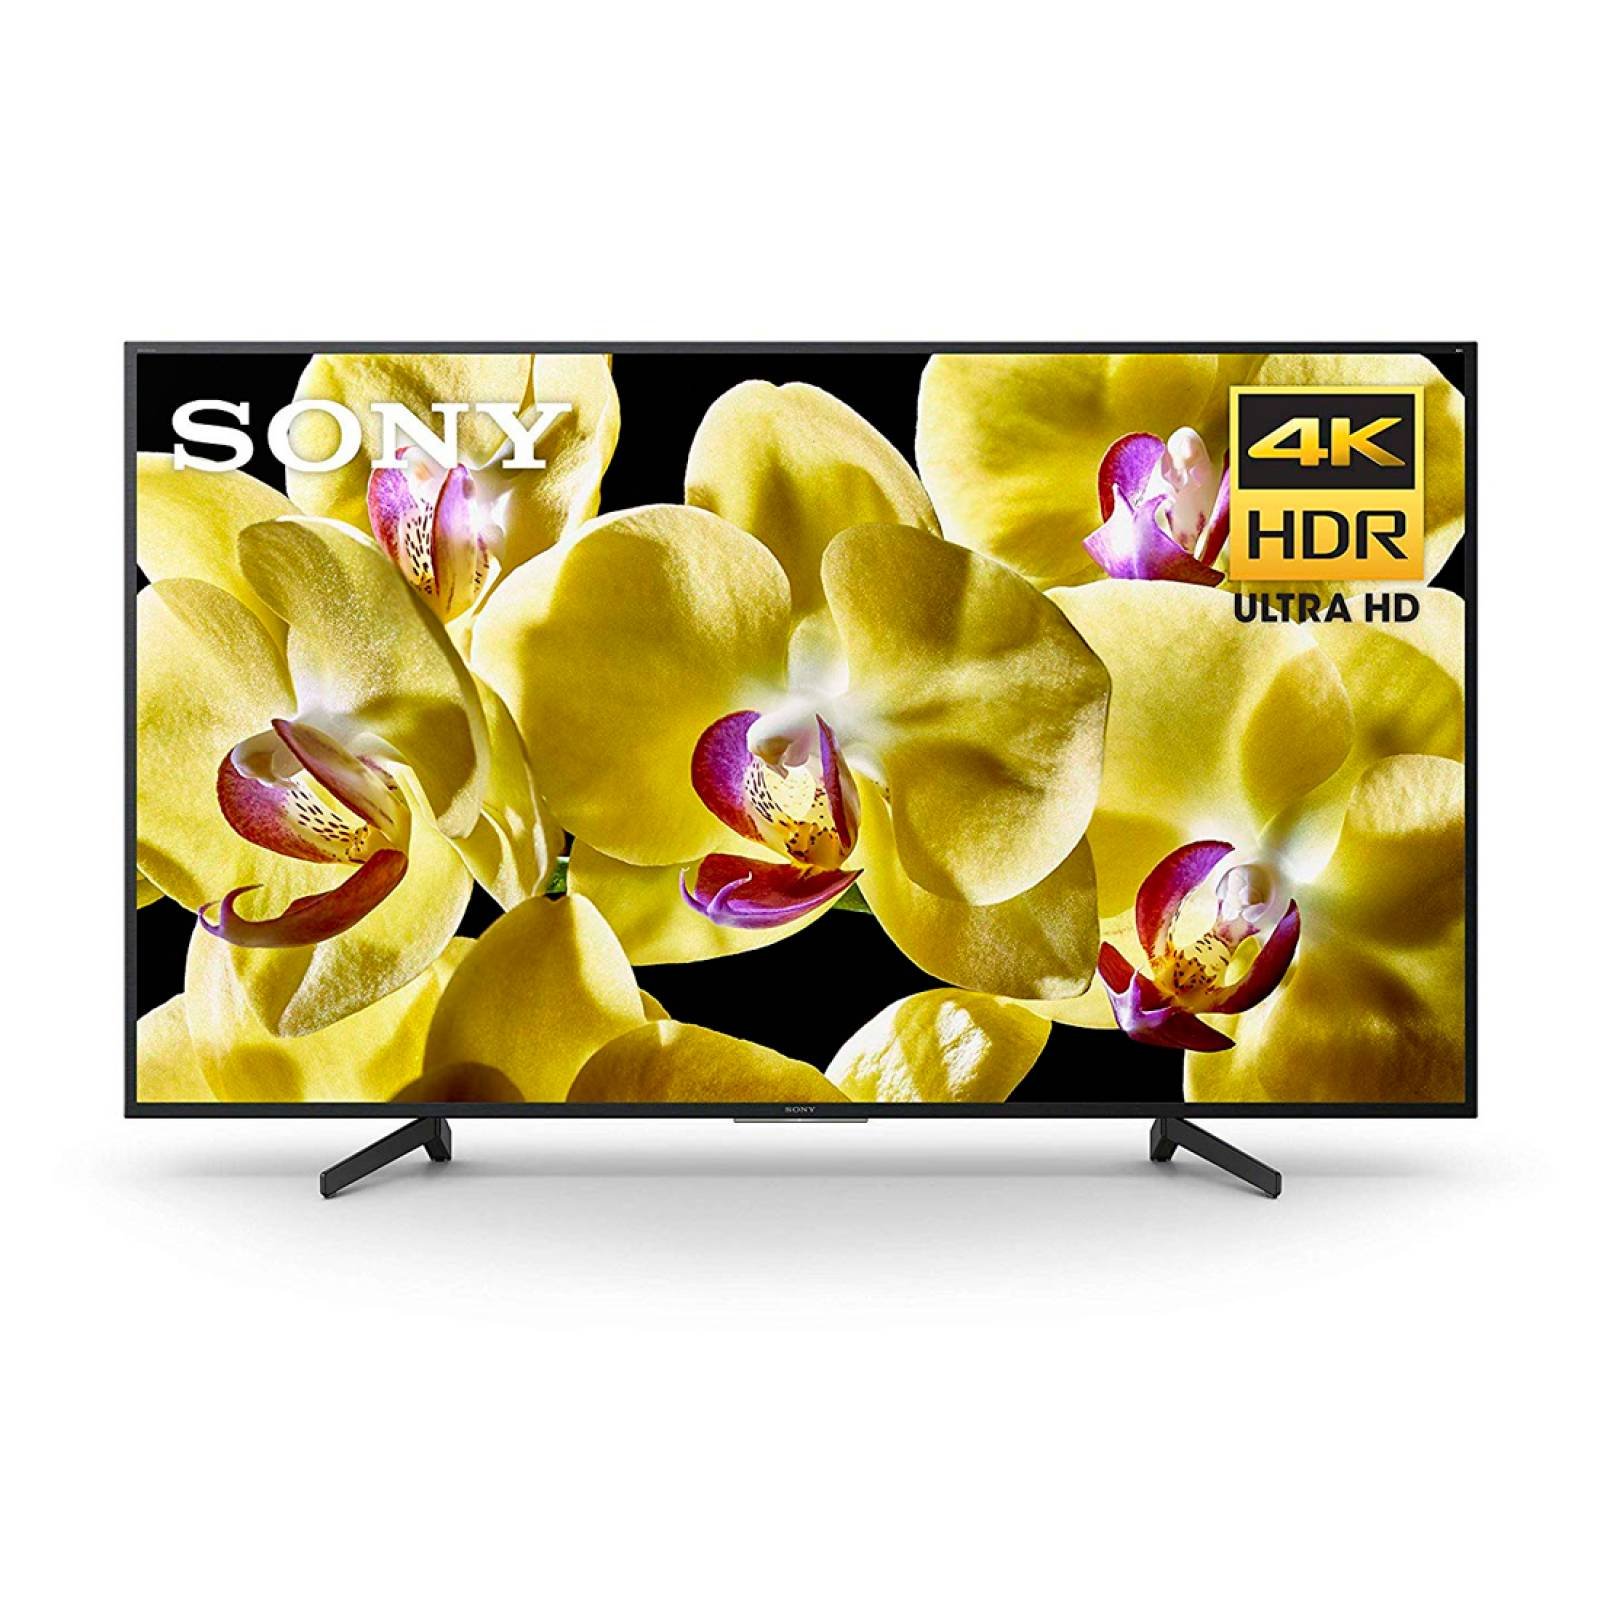 Smart TV 65 Pulg LED 4K HDR Android Bravia XBR-65X800G Sony